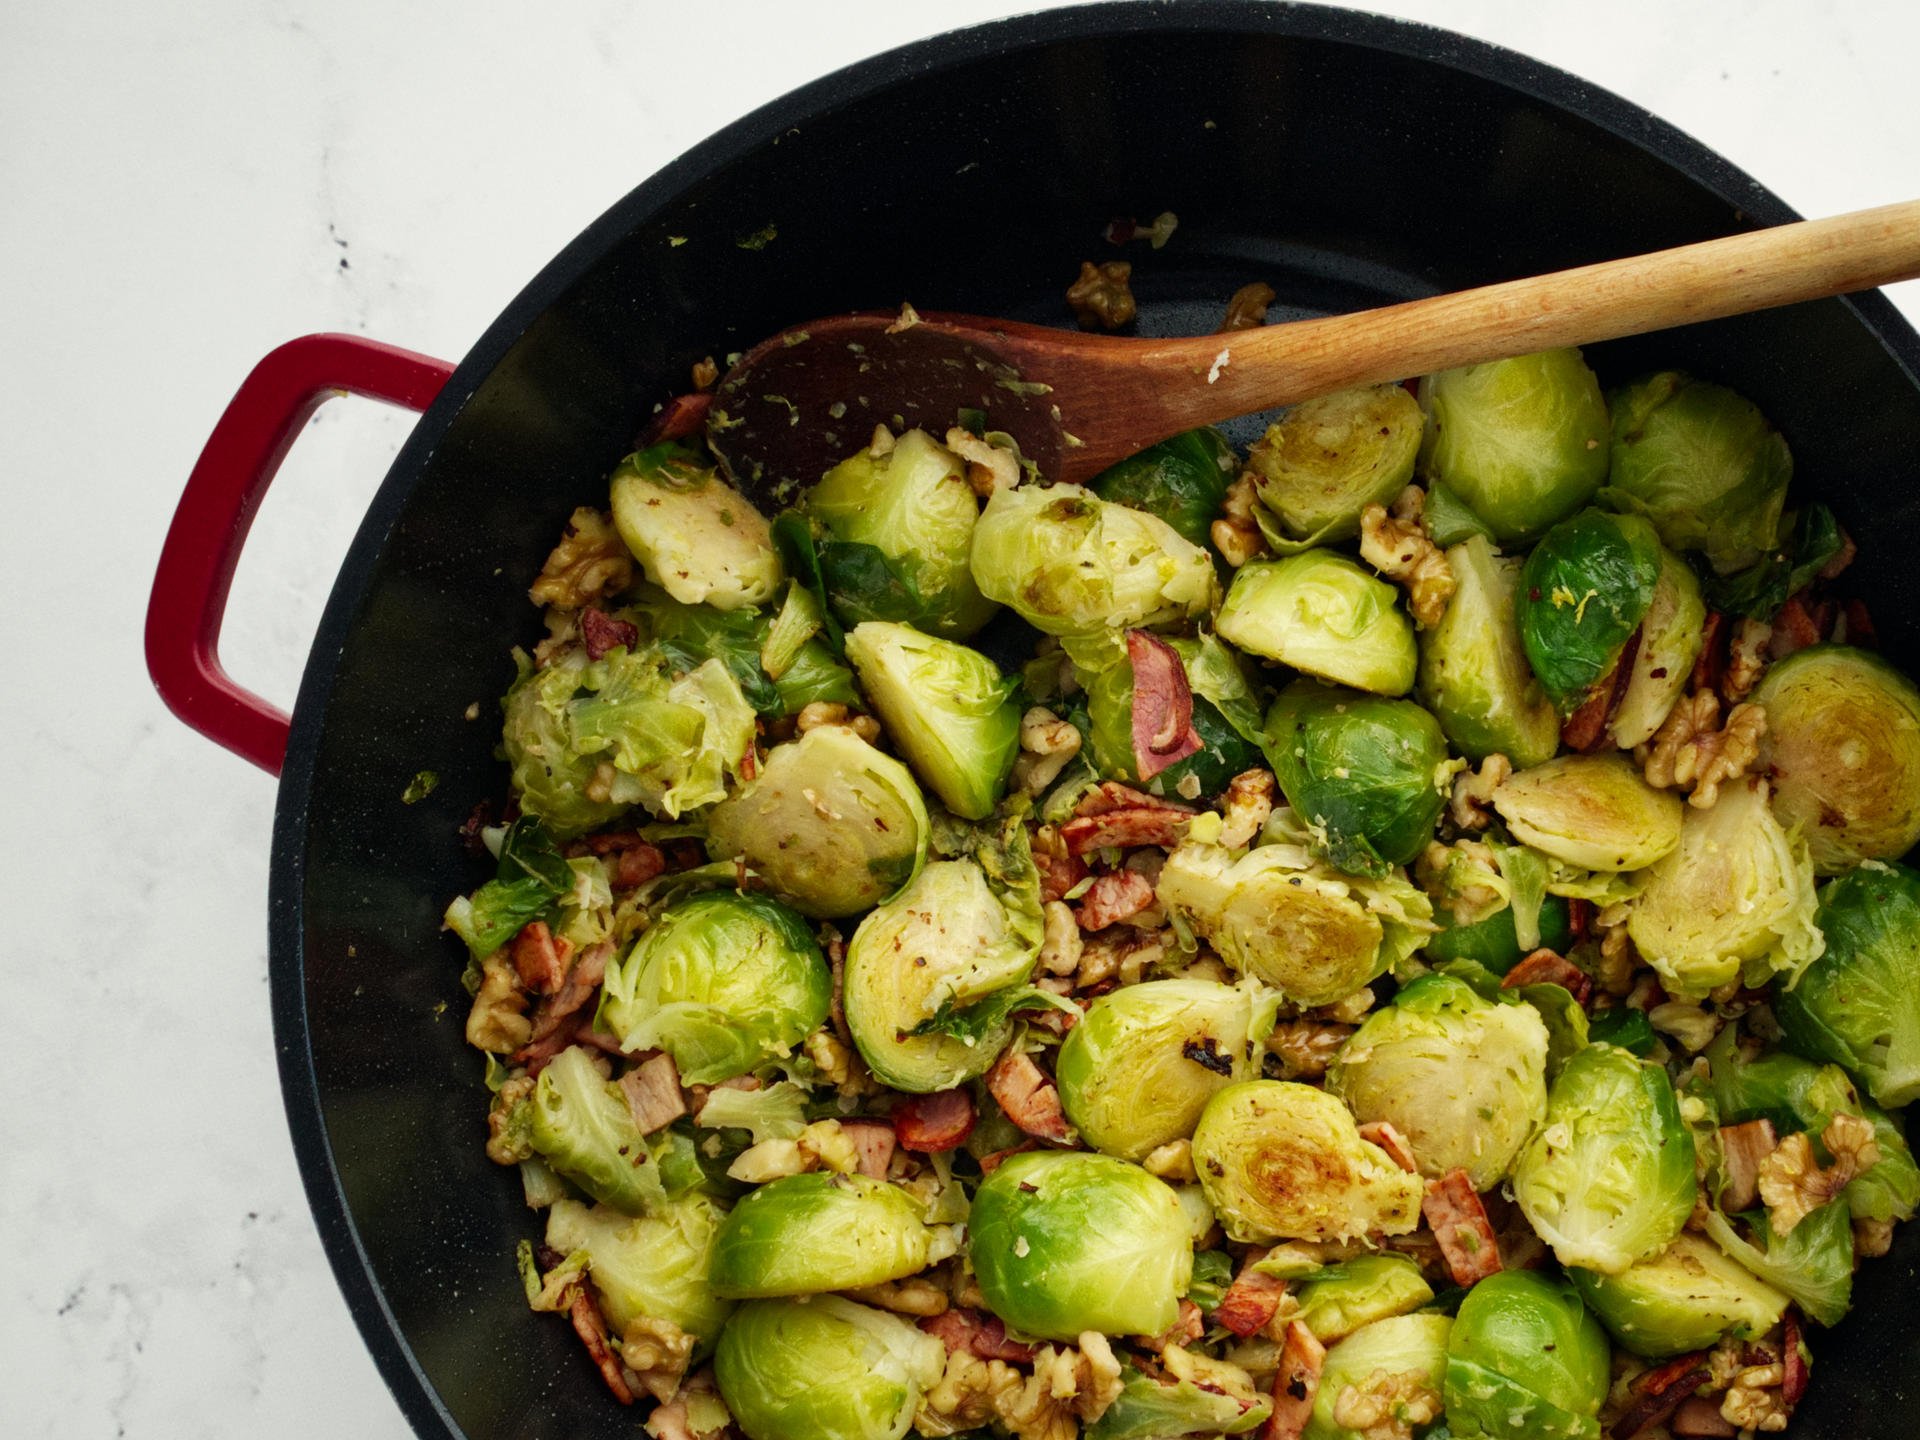 Brussels sprouts with Bacon and Walnuts